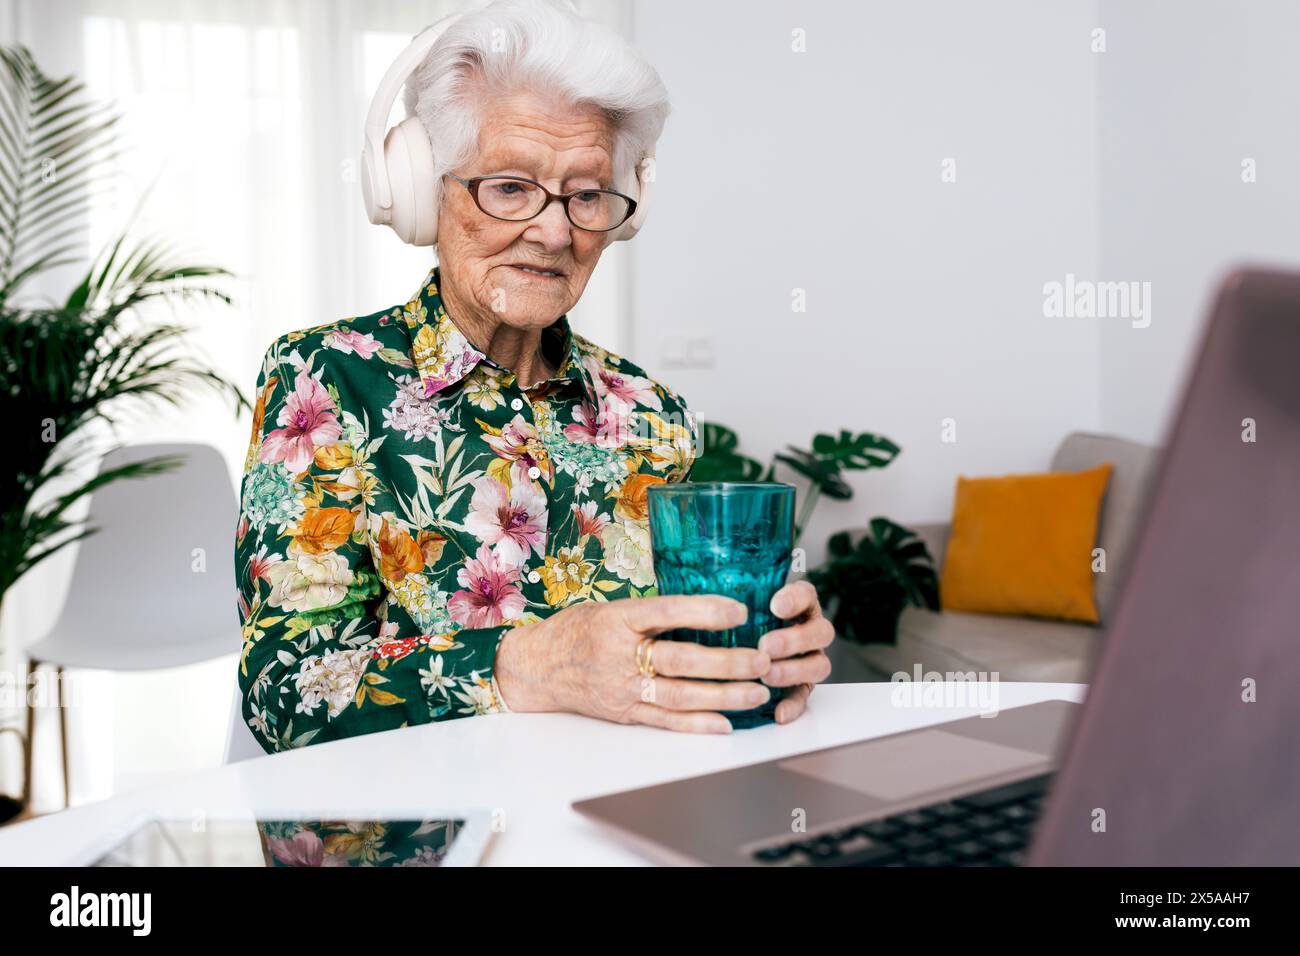 Elderly lady in a floral shirt enjoys a glass of water while working on her laptop in a bright living room, showcasing active aging and technology use Stock Photo